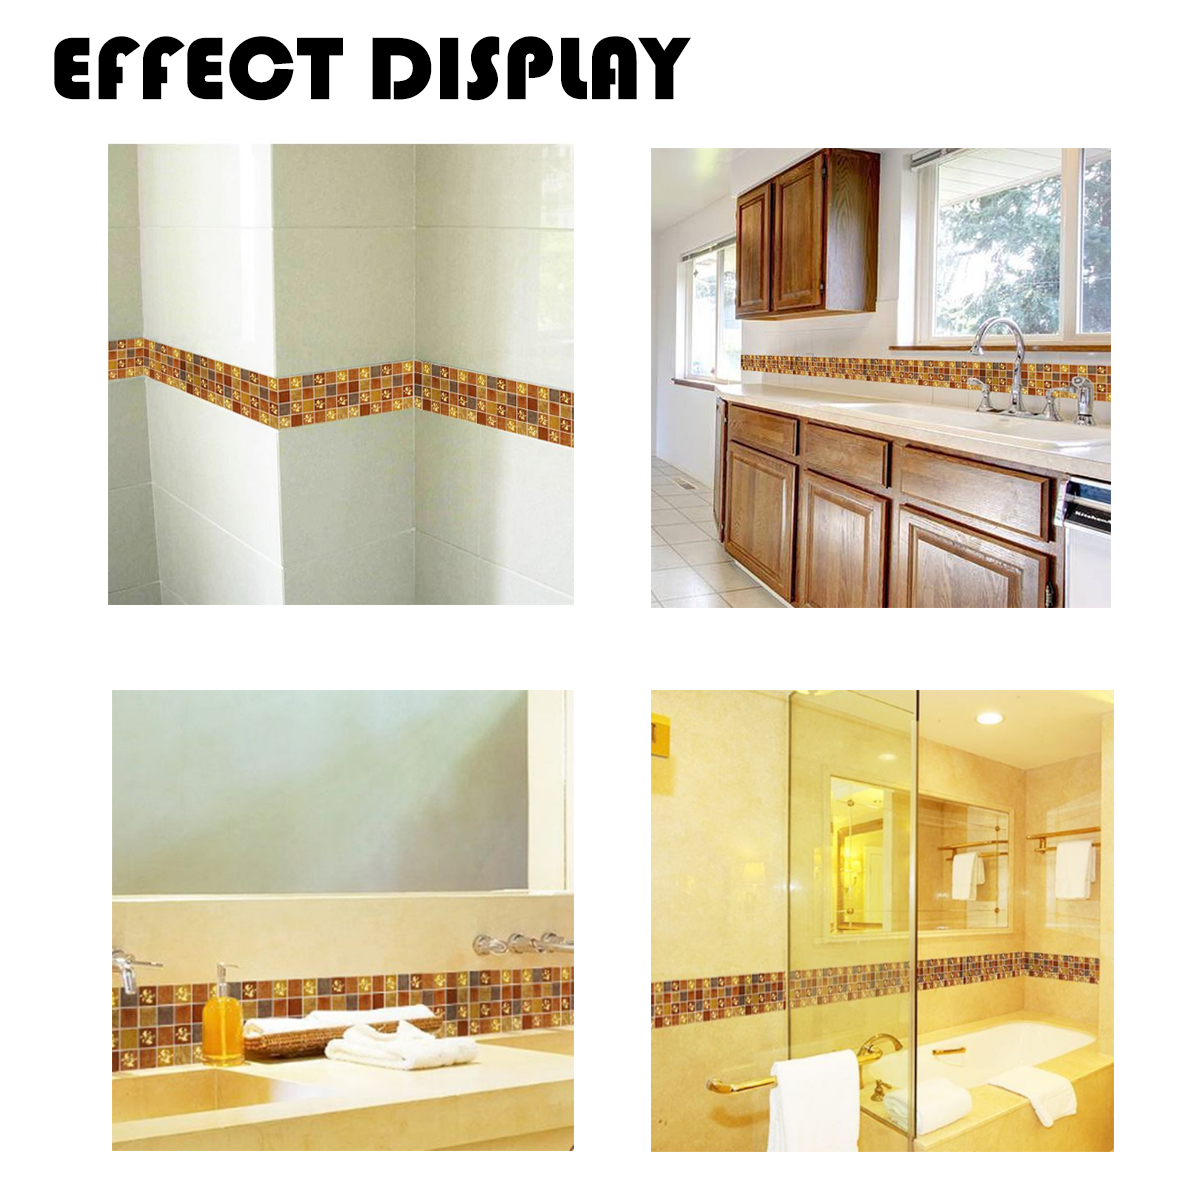 3D-Self-Adhesive-Waterproof-Wallpaper-Border-Peel-and-Stick-for-Bathroom-Kitchen-Counter-Top-Tiles-S-1725407-4